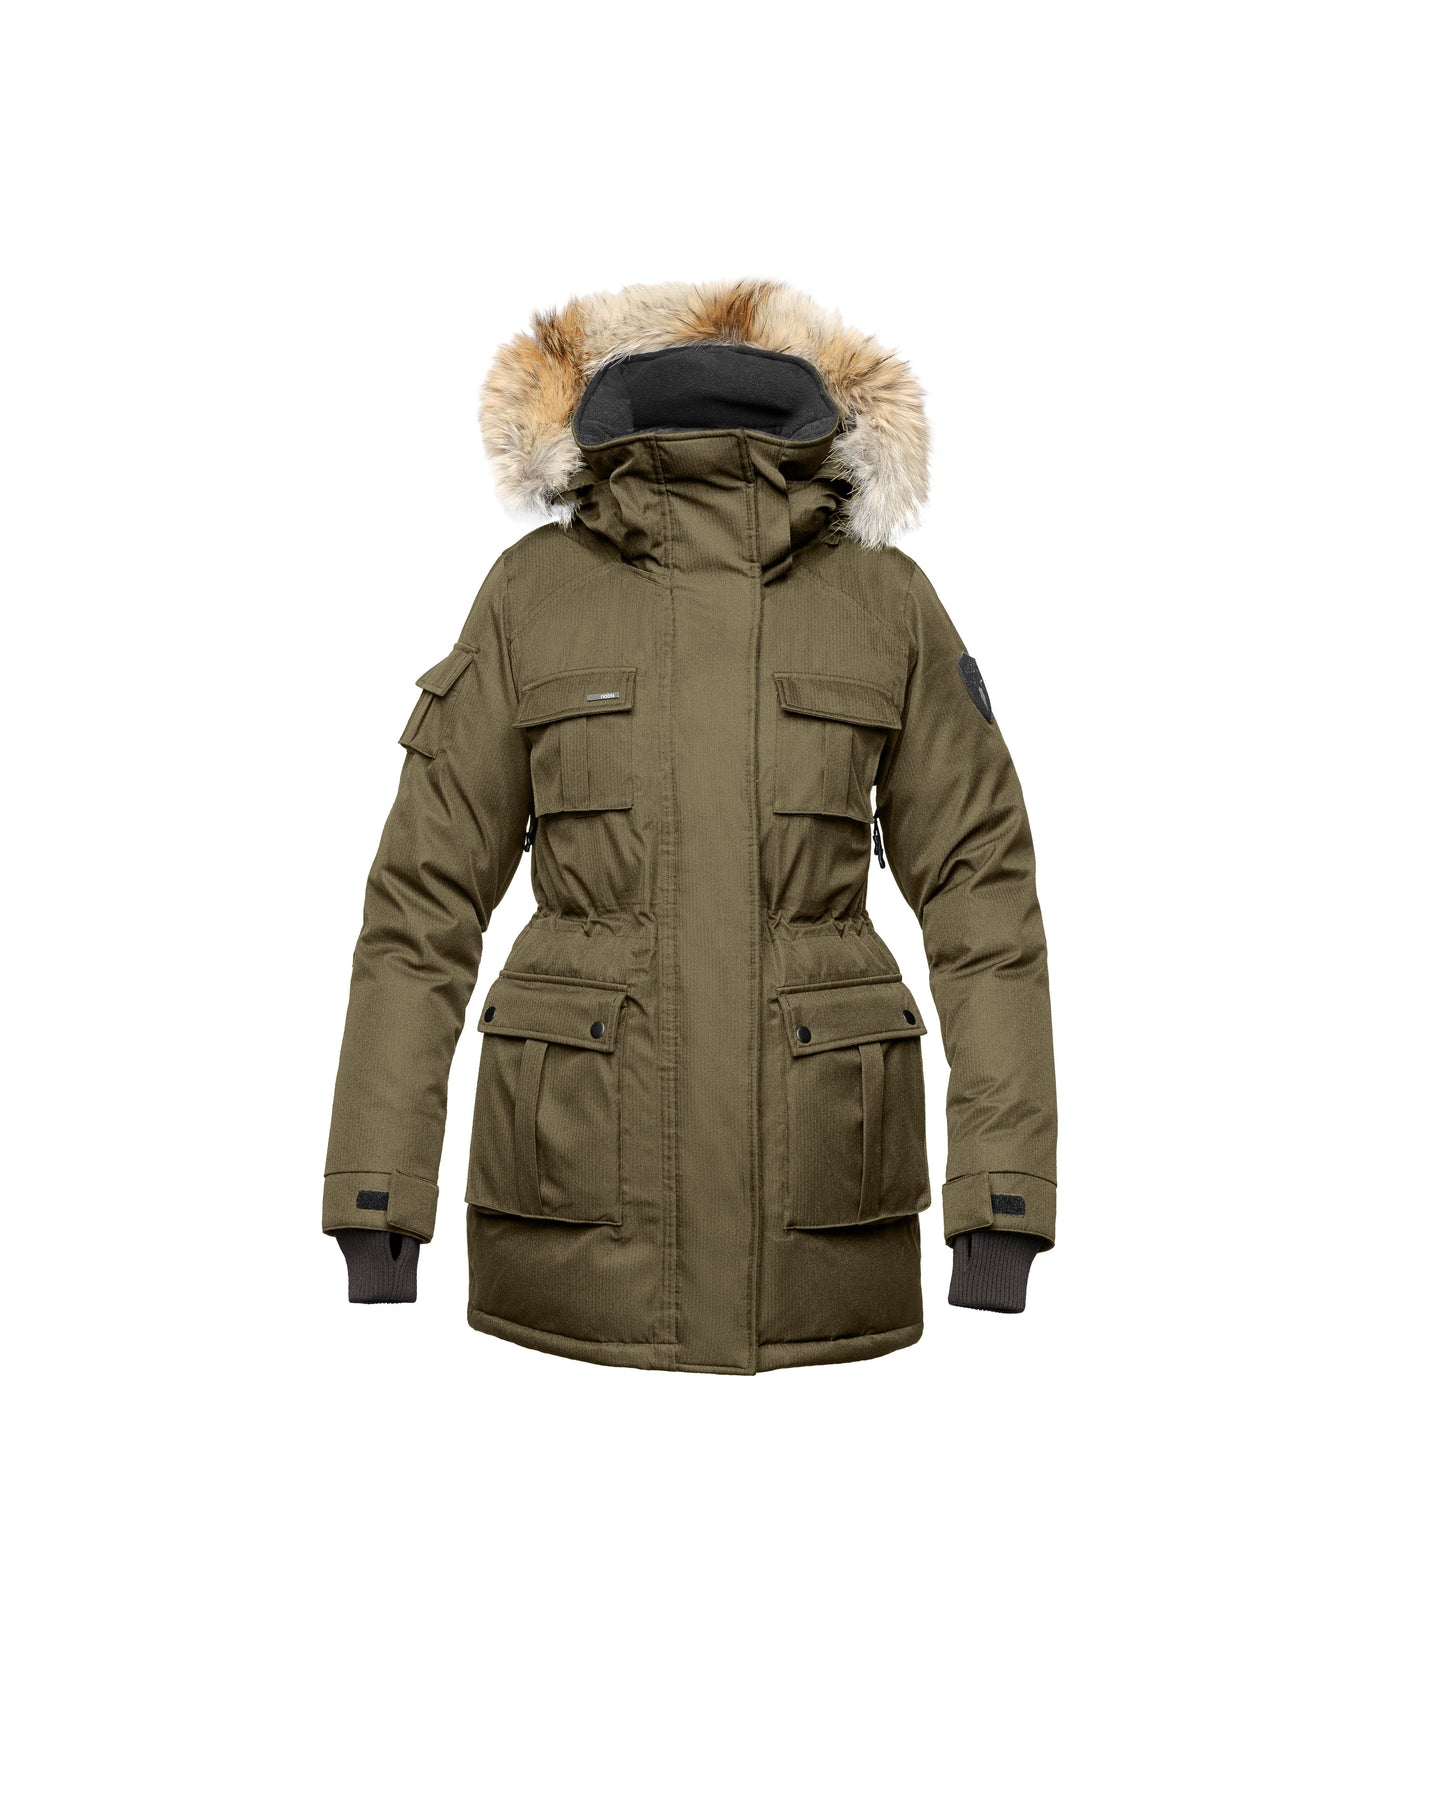 Women's down filled thigh length parka with four pleated patch pockets and an adjustable waist in CH Army Green